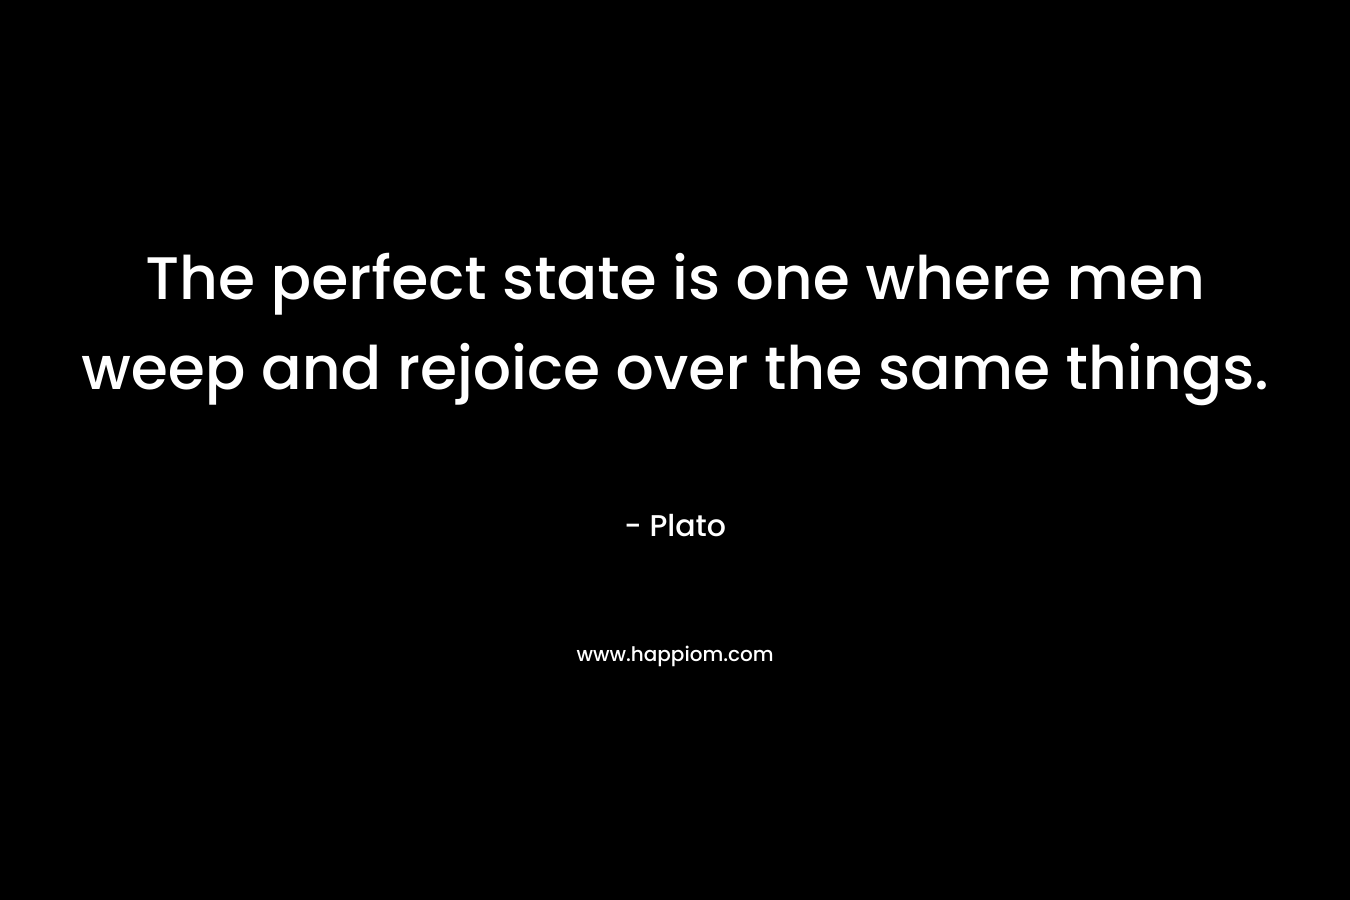 The perfect state is one where men weep and rejoice over the same things. – Plato